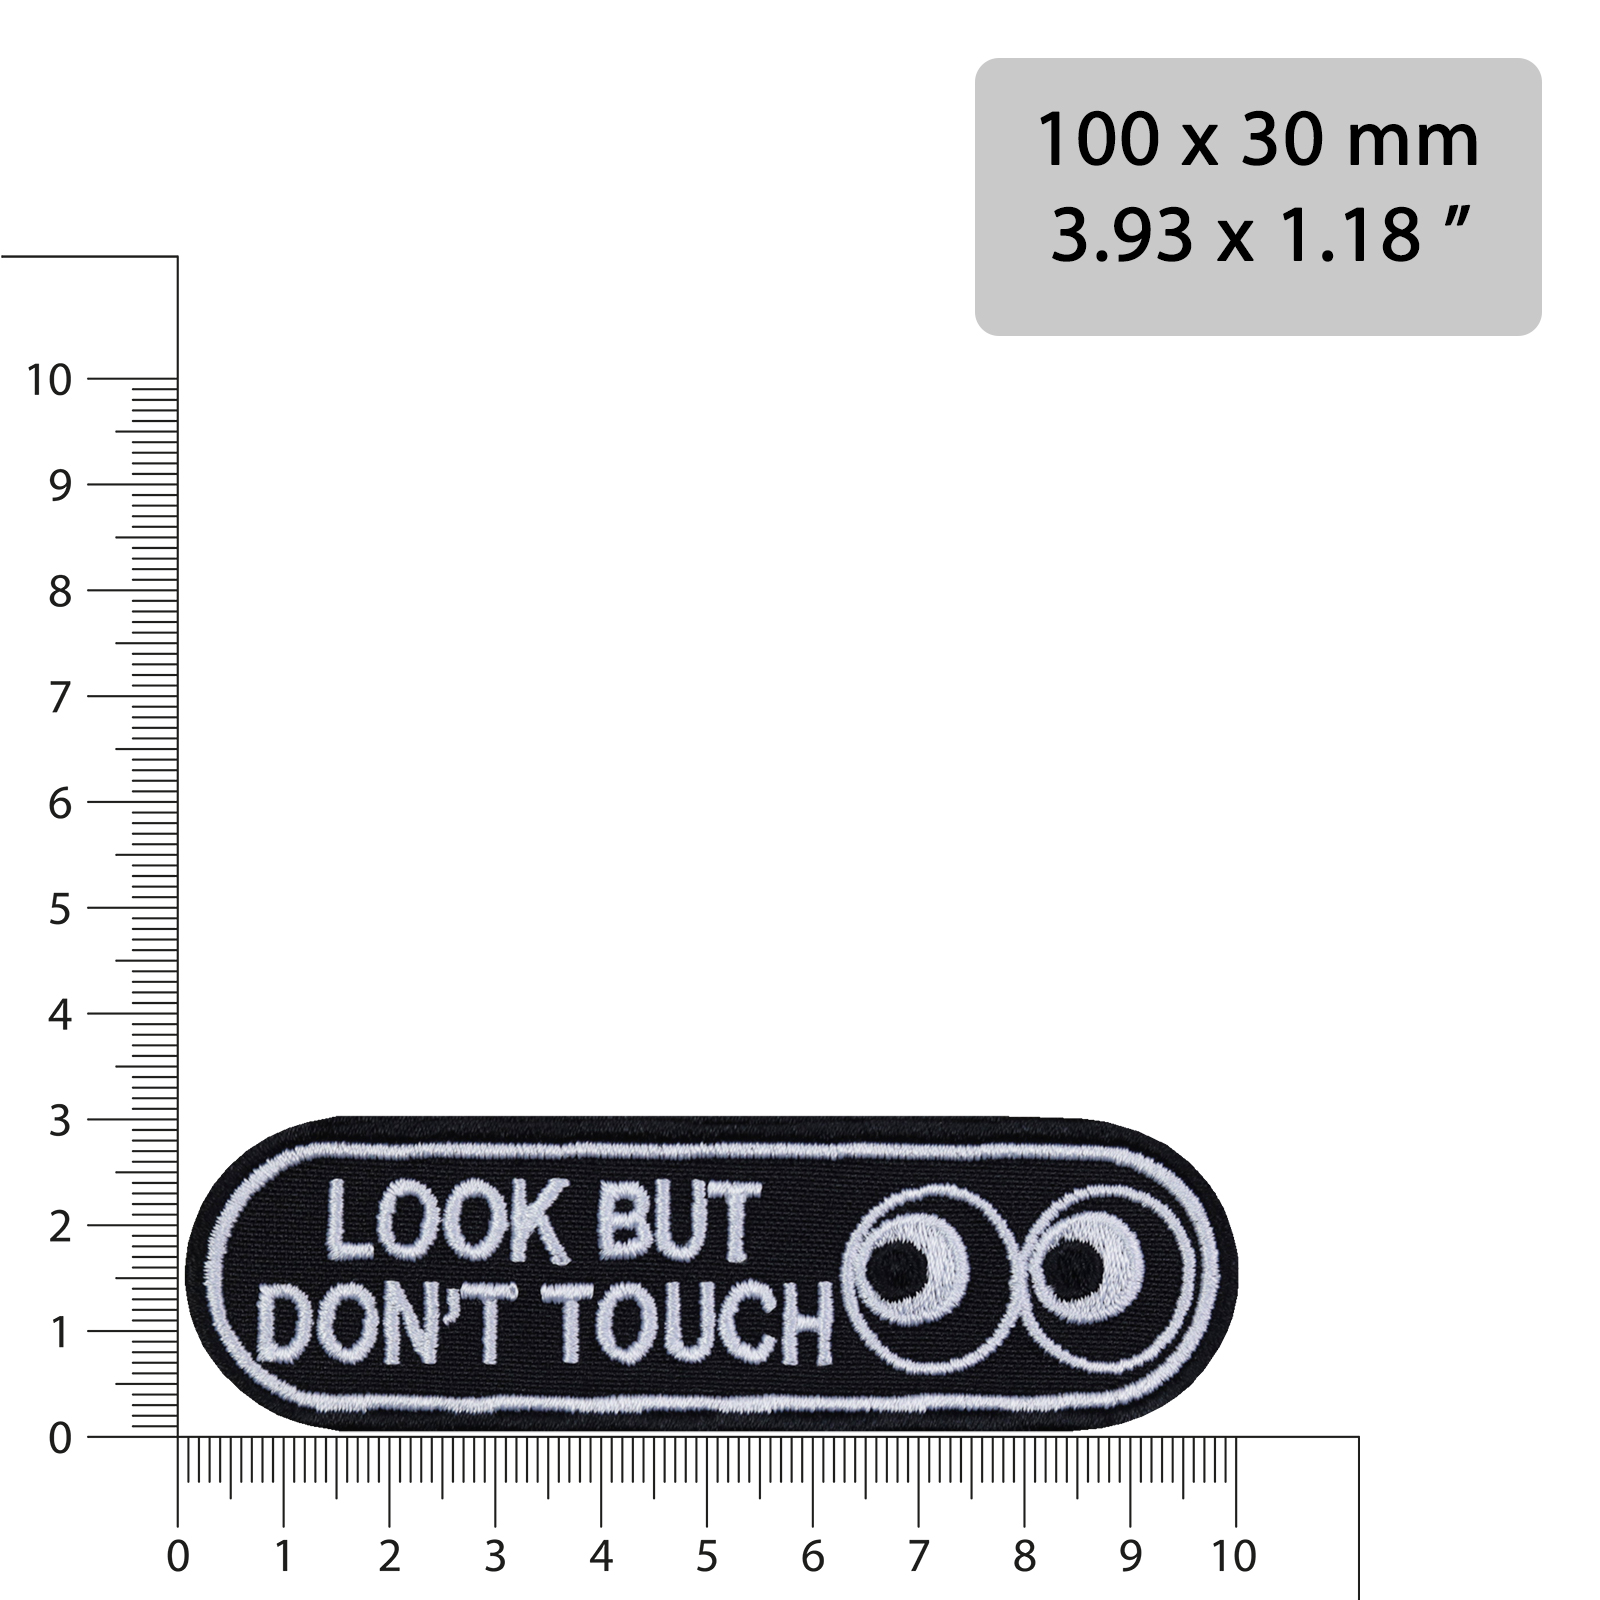 Look but don't touch - Patch